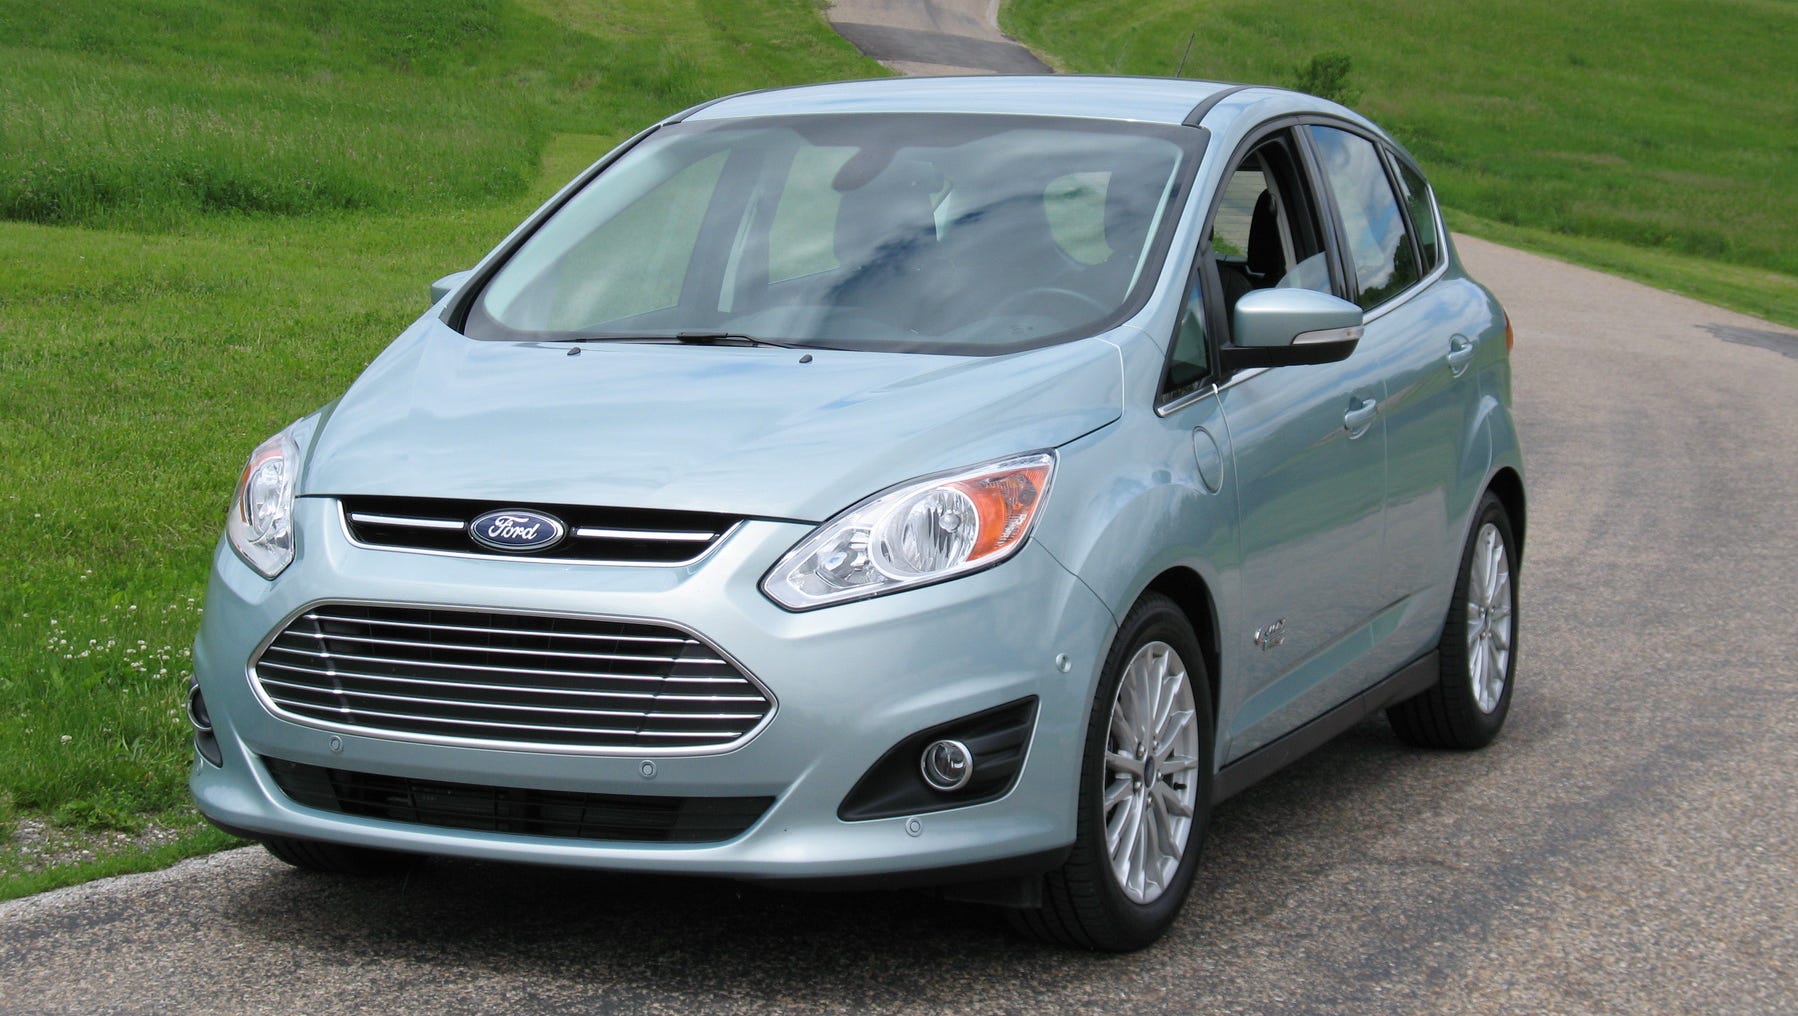 2016 Ford C-MAX Hybrid/Energi continues to excite